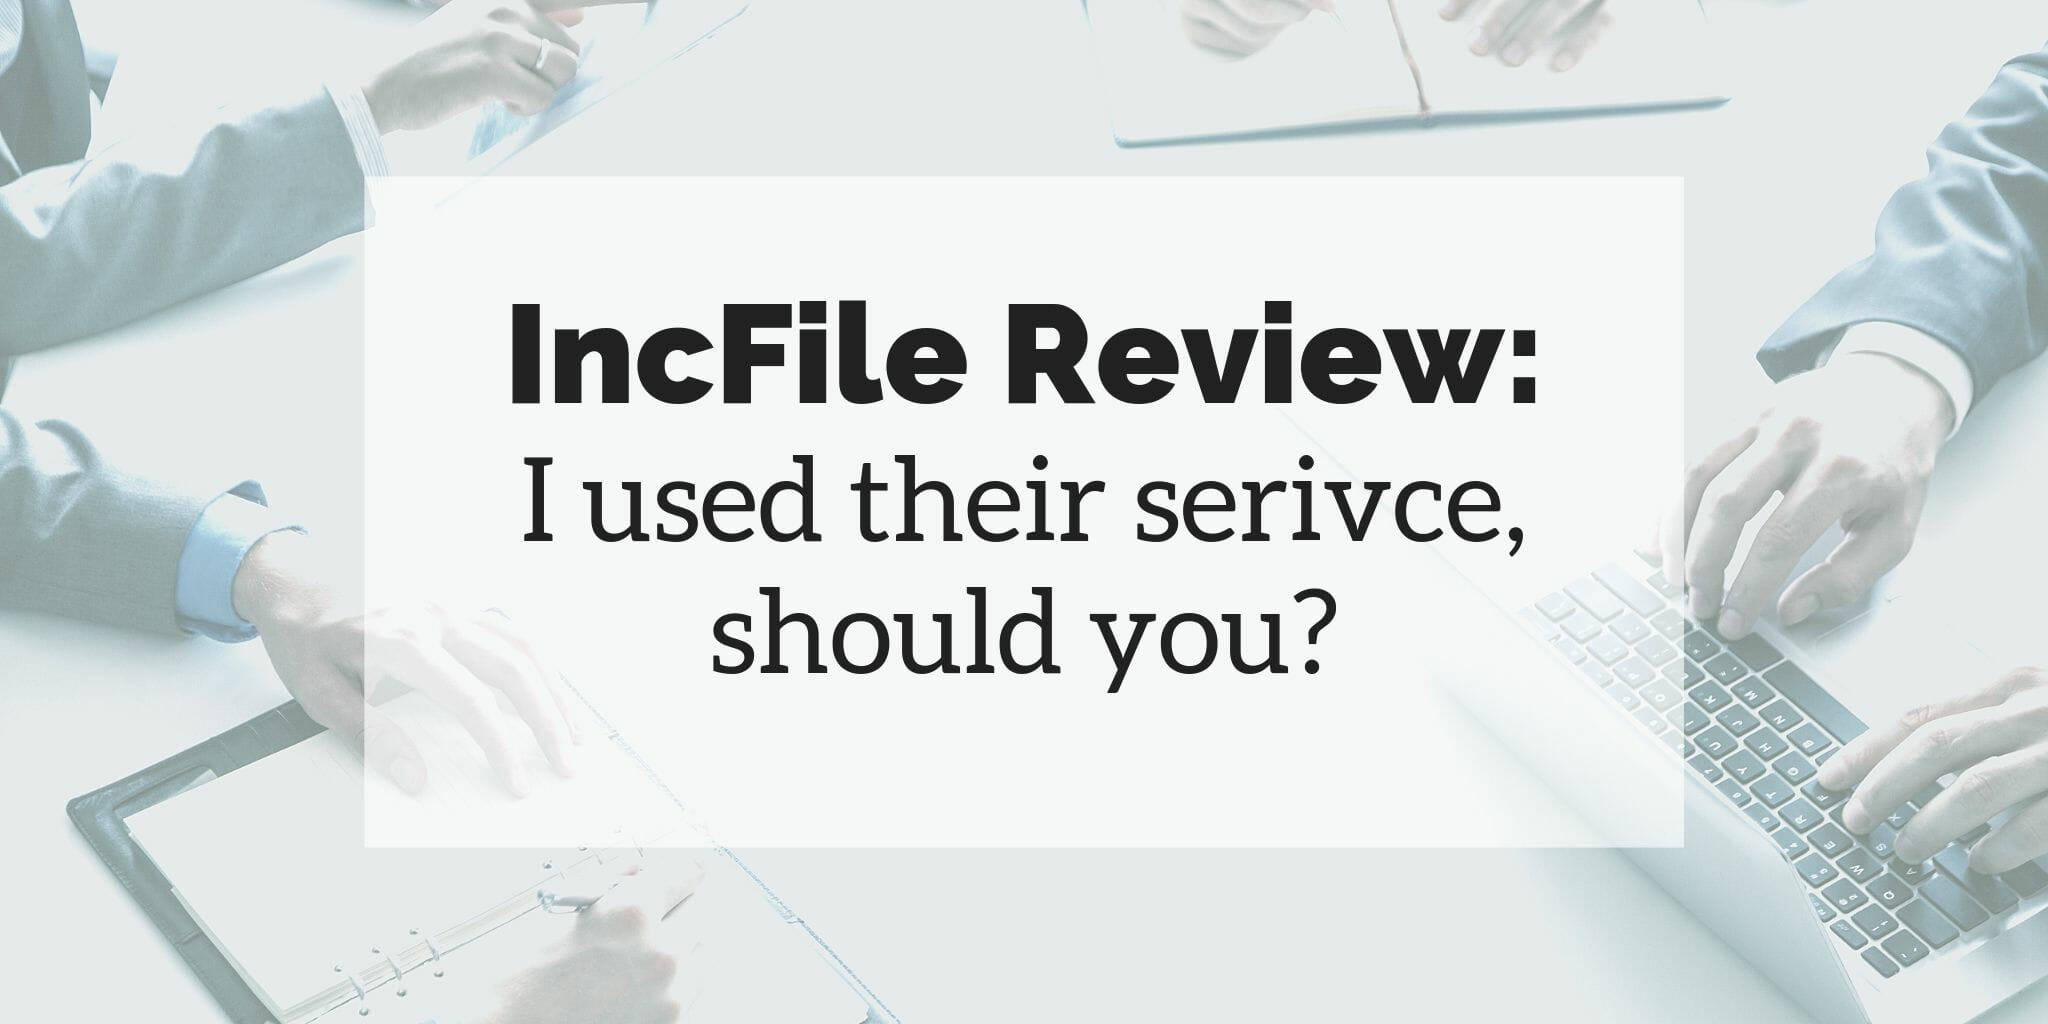 Incfile Discount